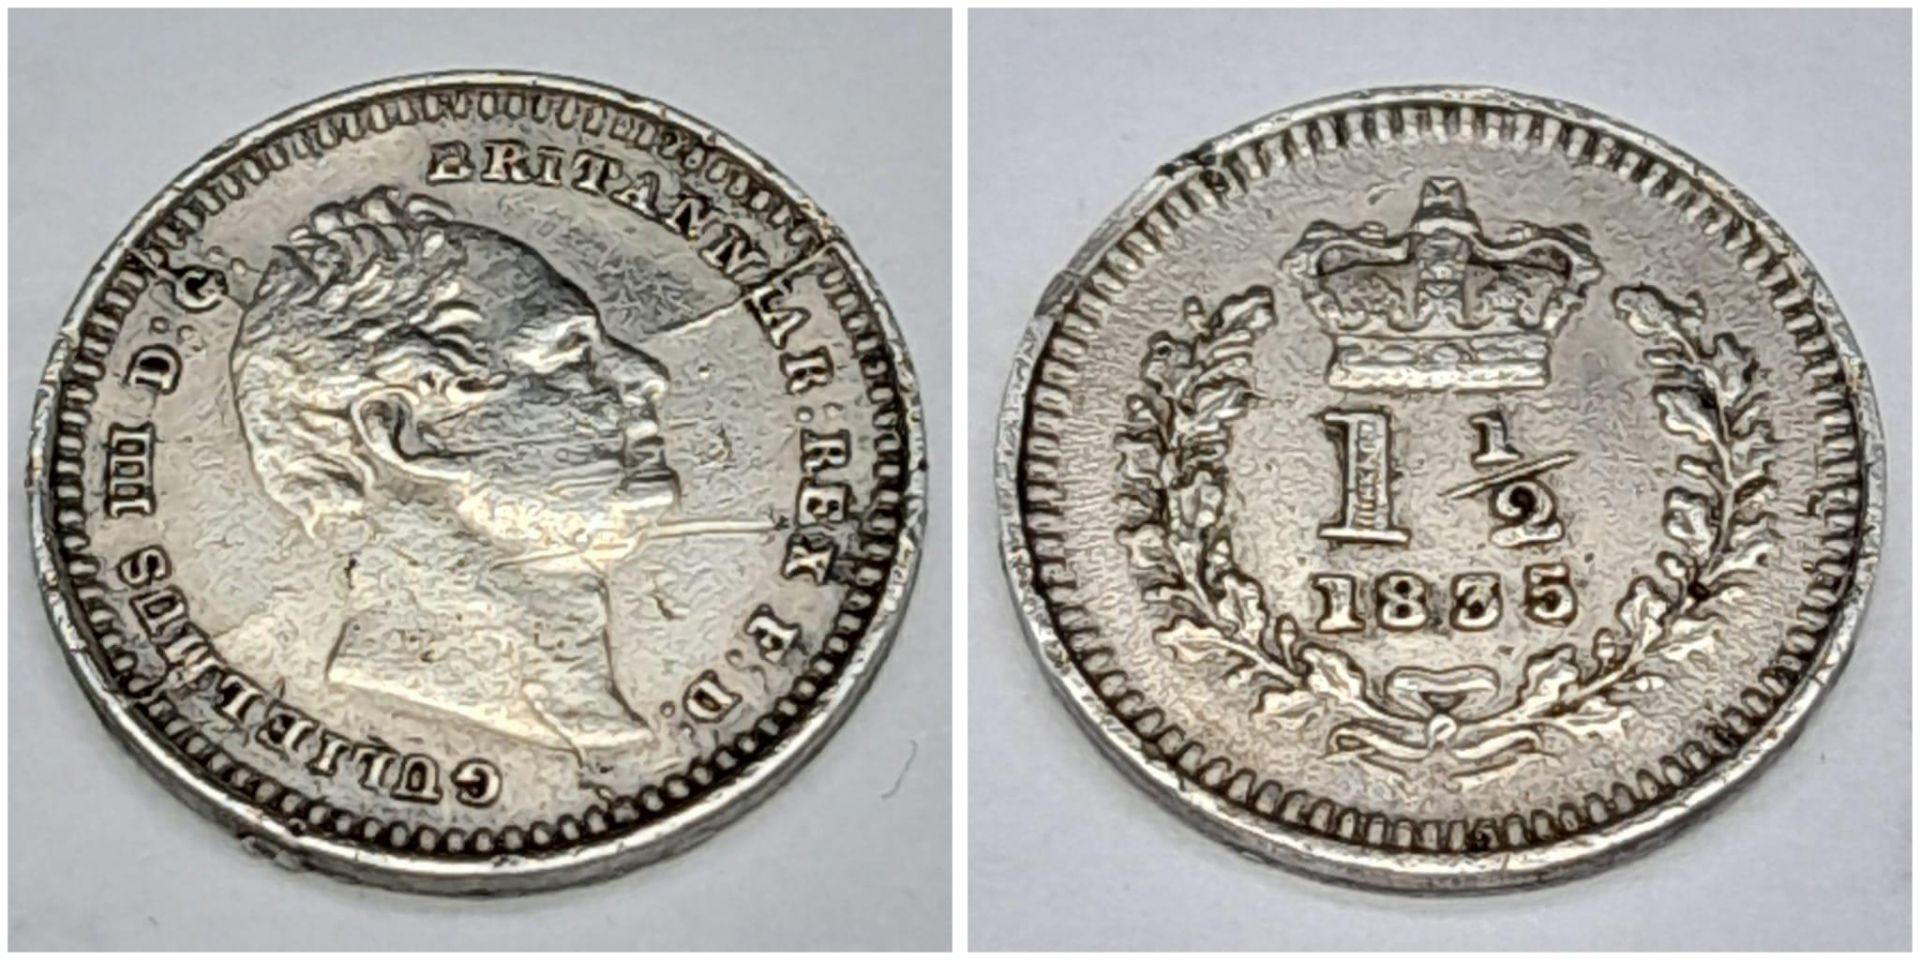 An 1835/4 William IV One and a Half Pence Silver Coin. S3839. Please see photos for conditions.